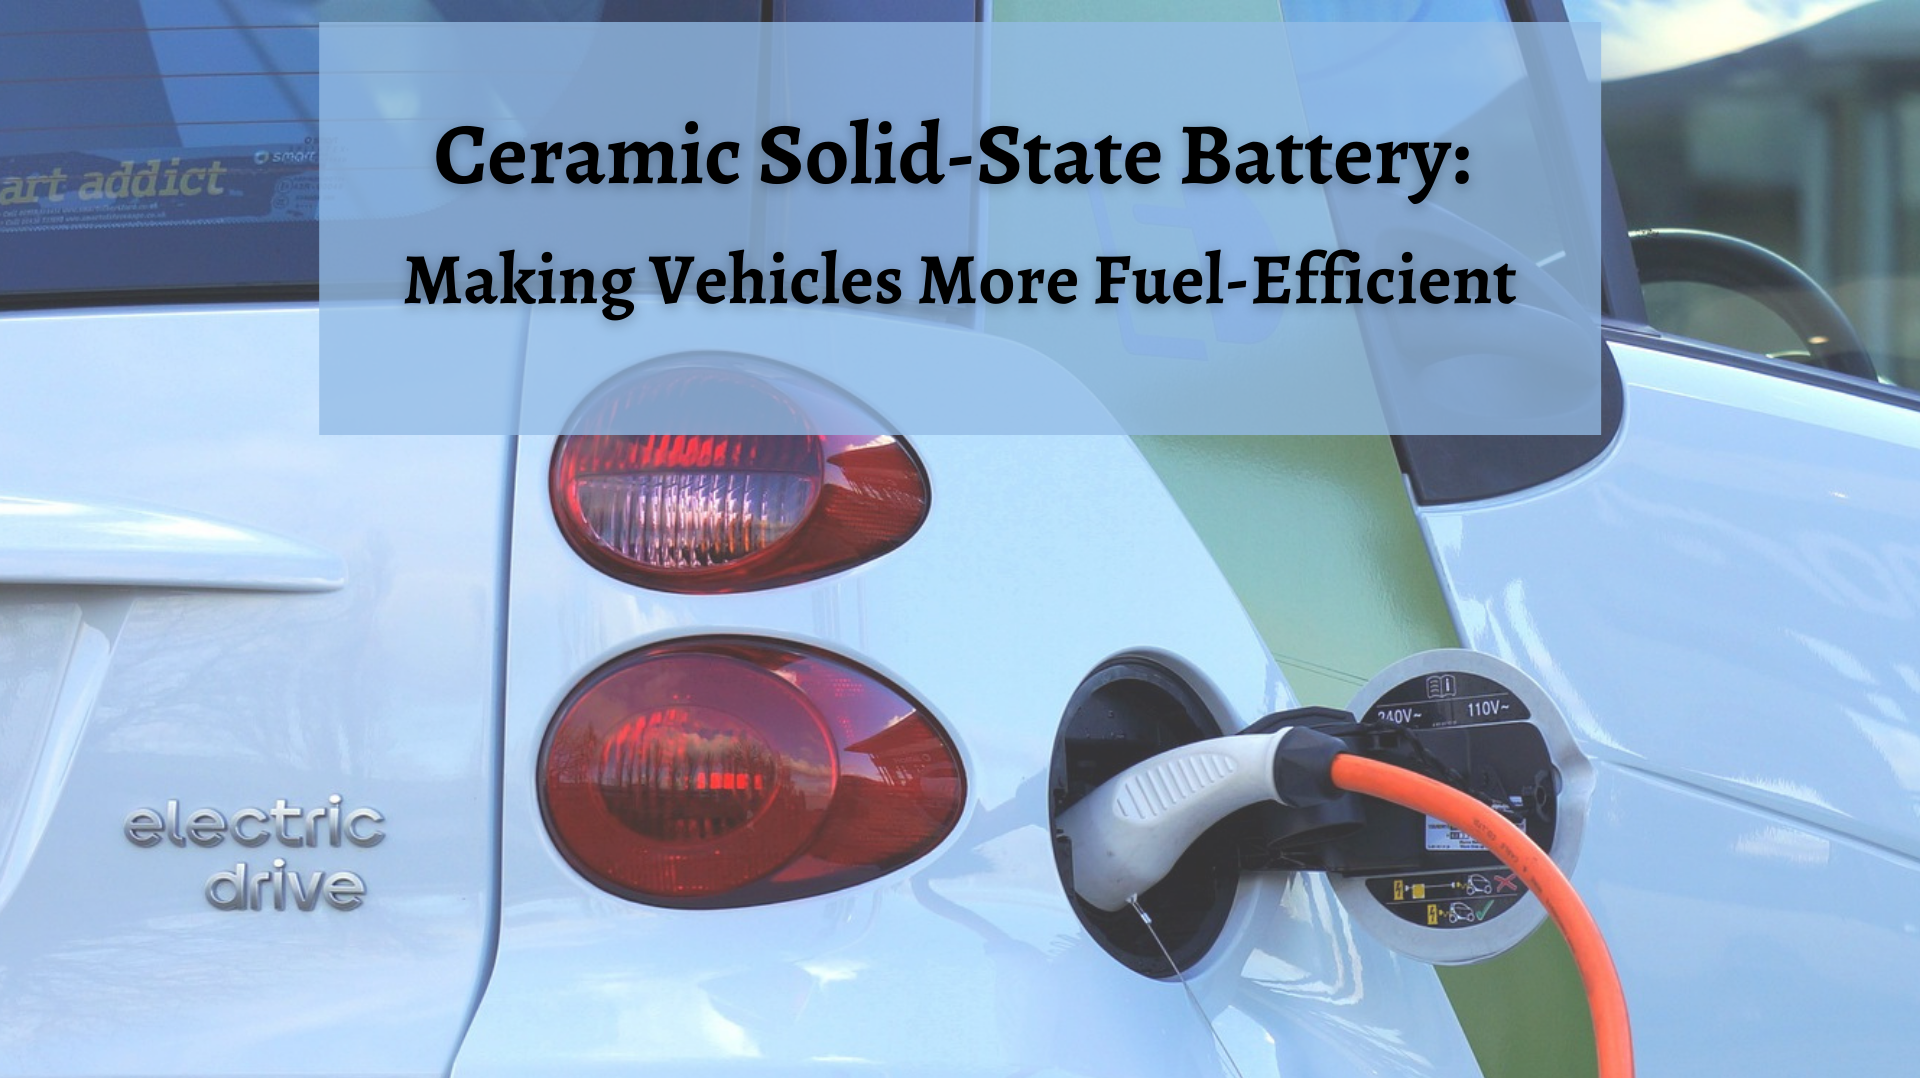 Ceramic Solid-State Battery Making Vehicles More Fuel-Efficient